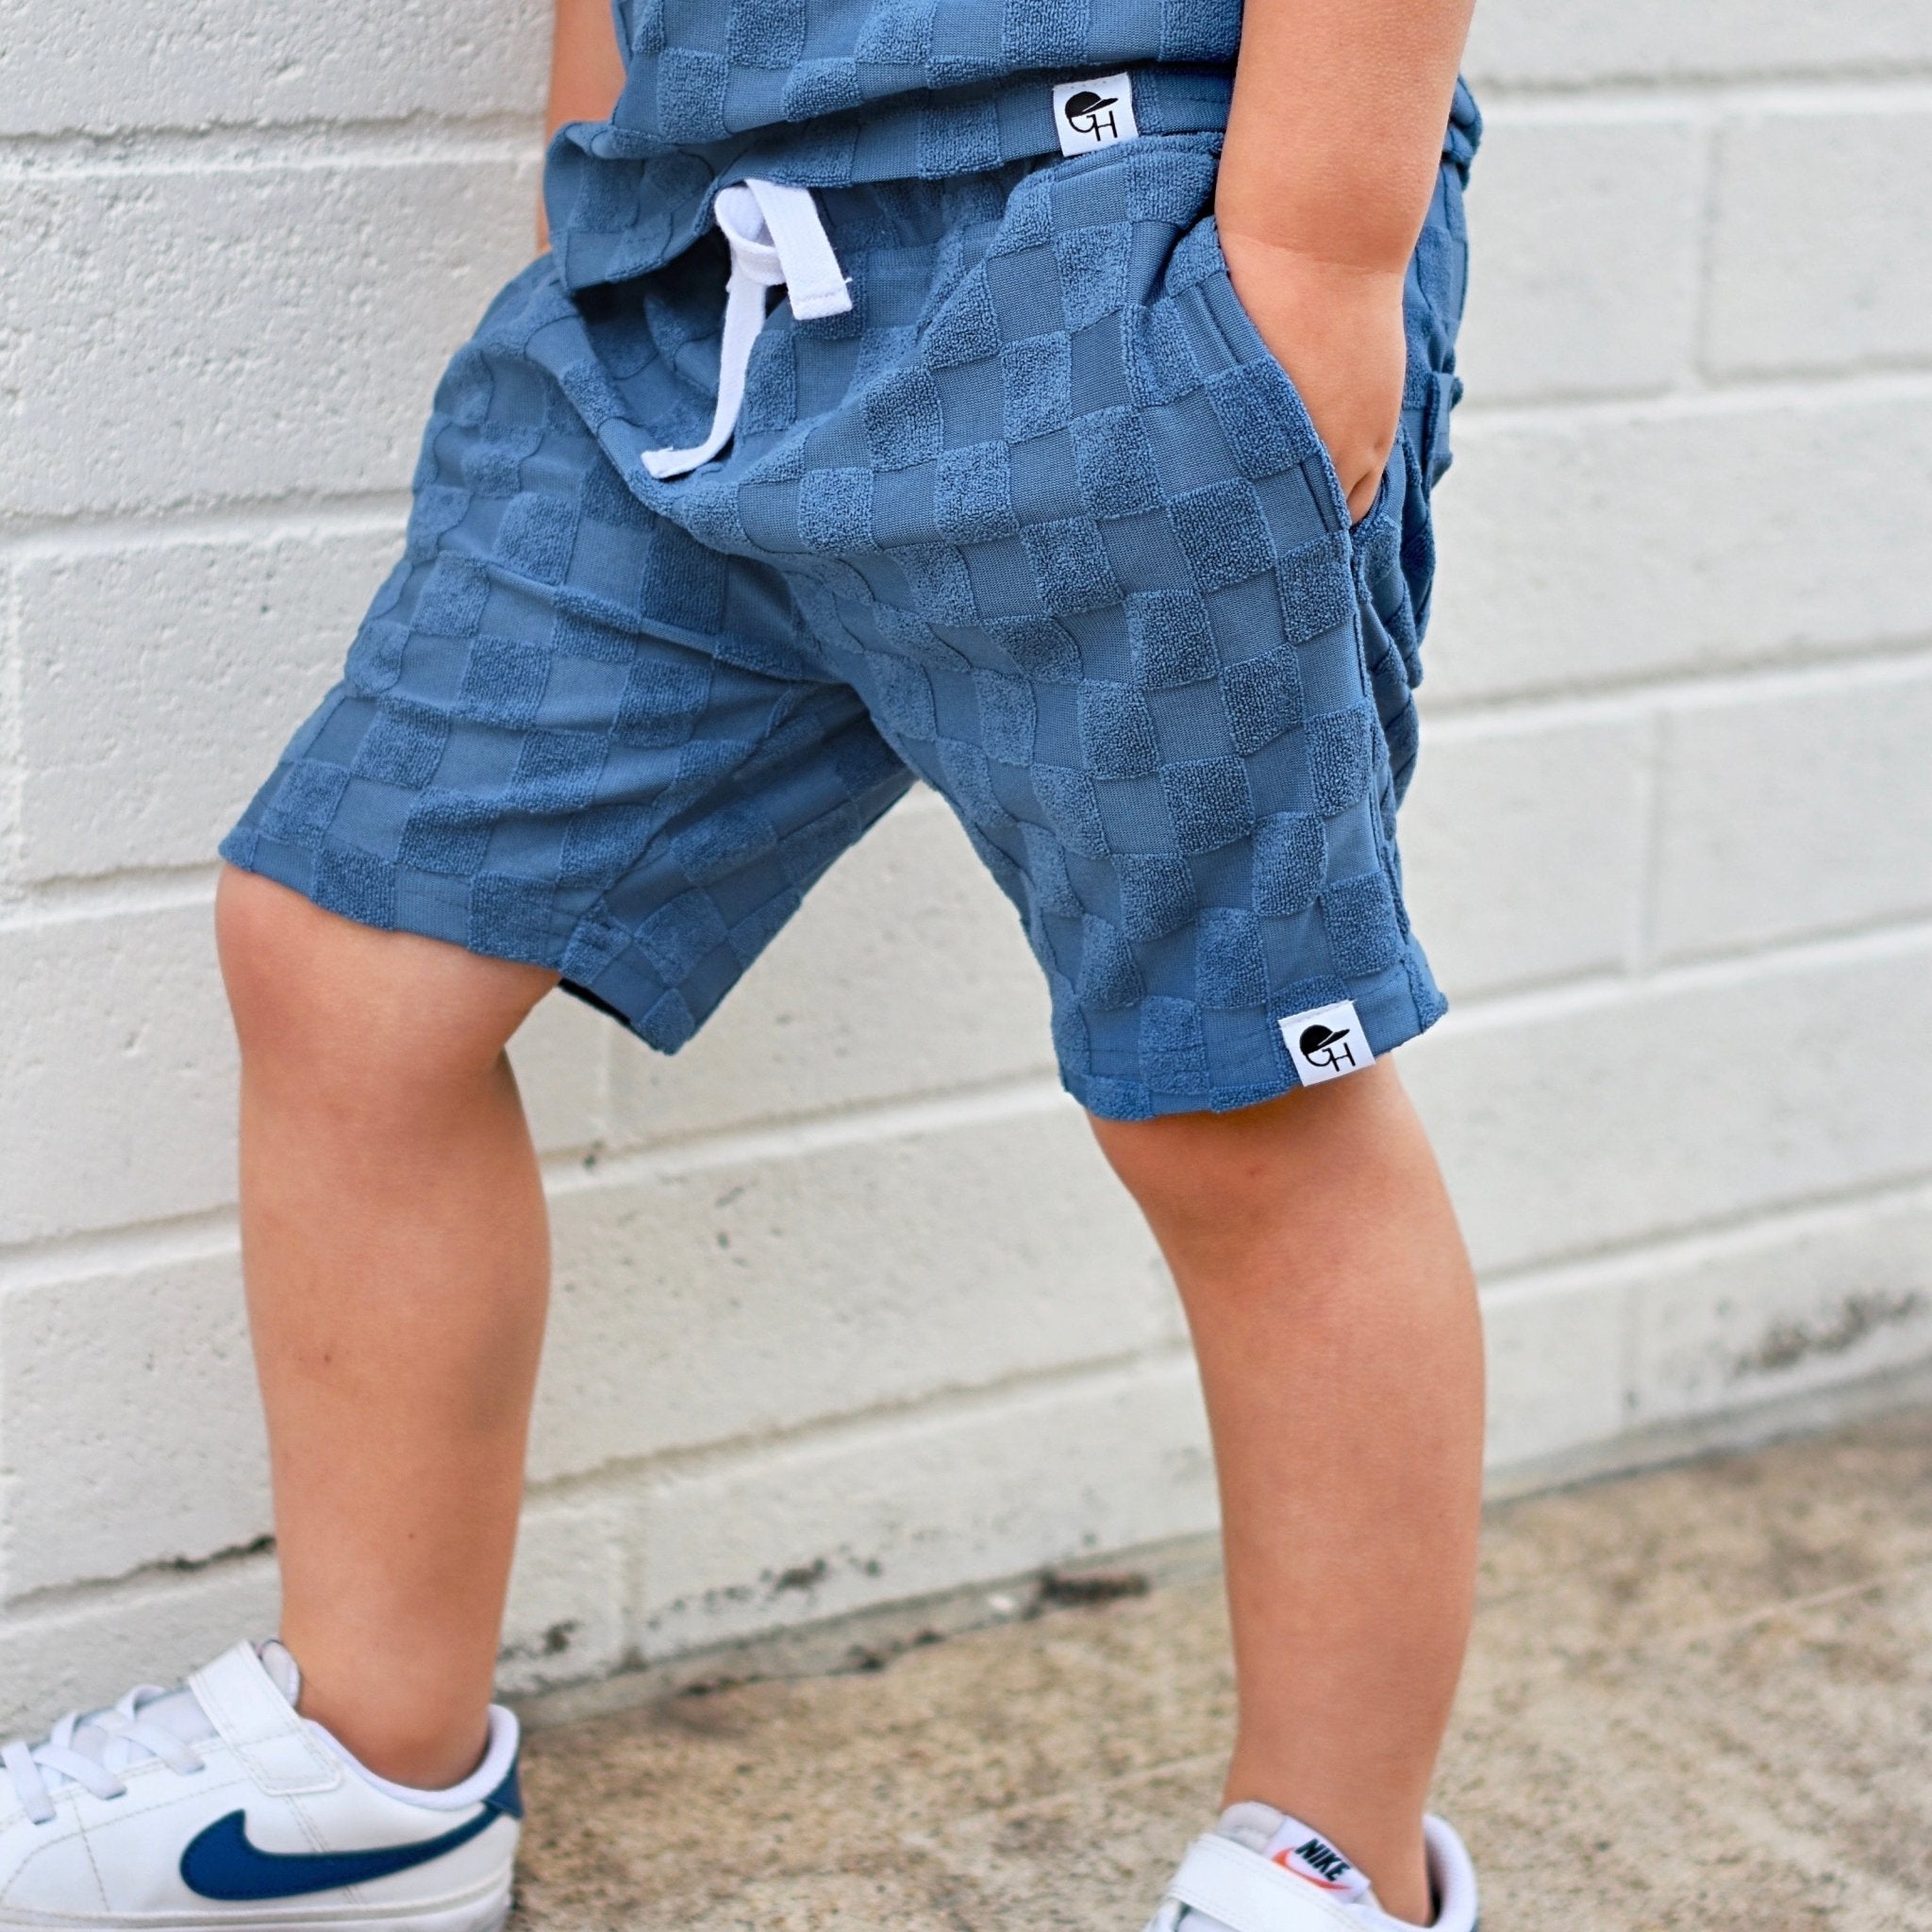 Blue Check Terry Shorts - George Hats